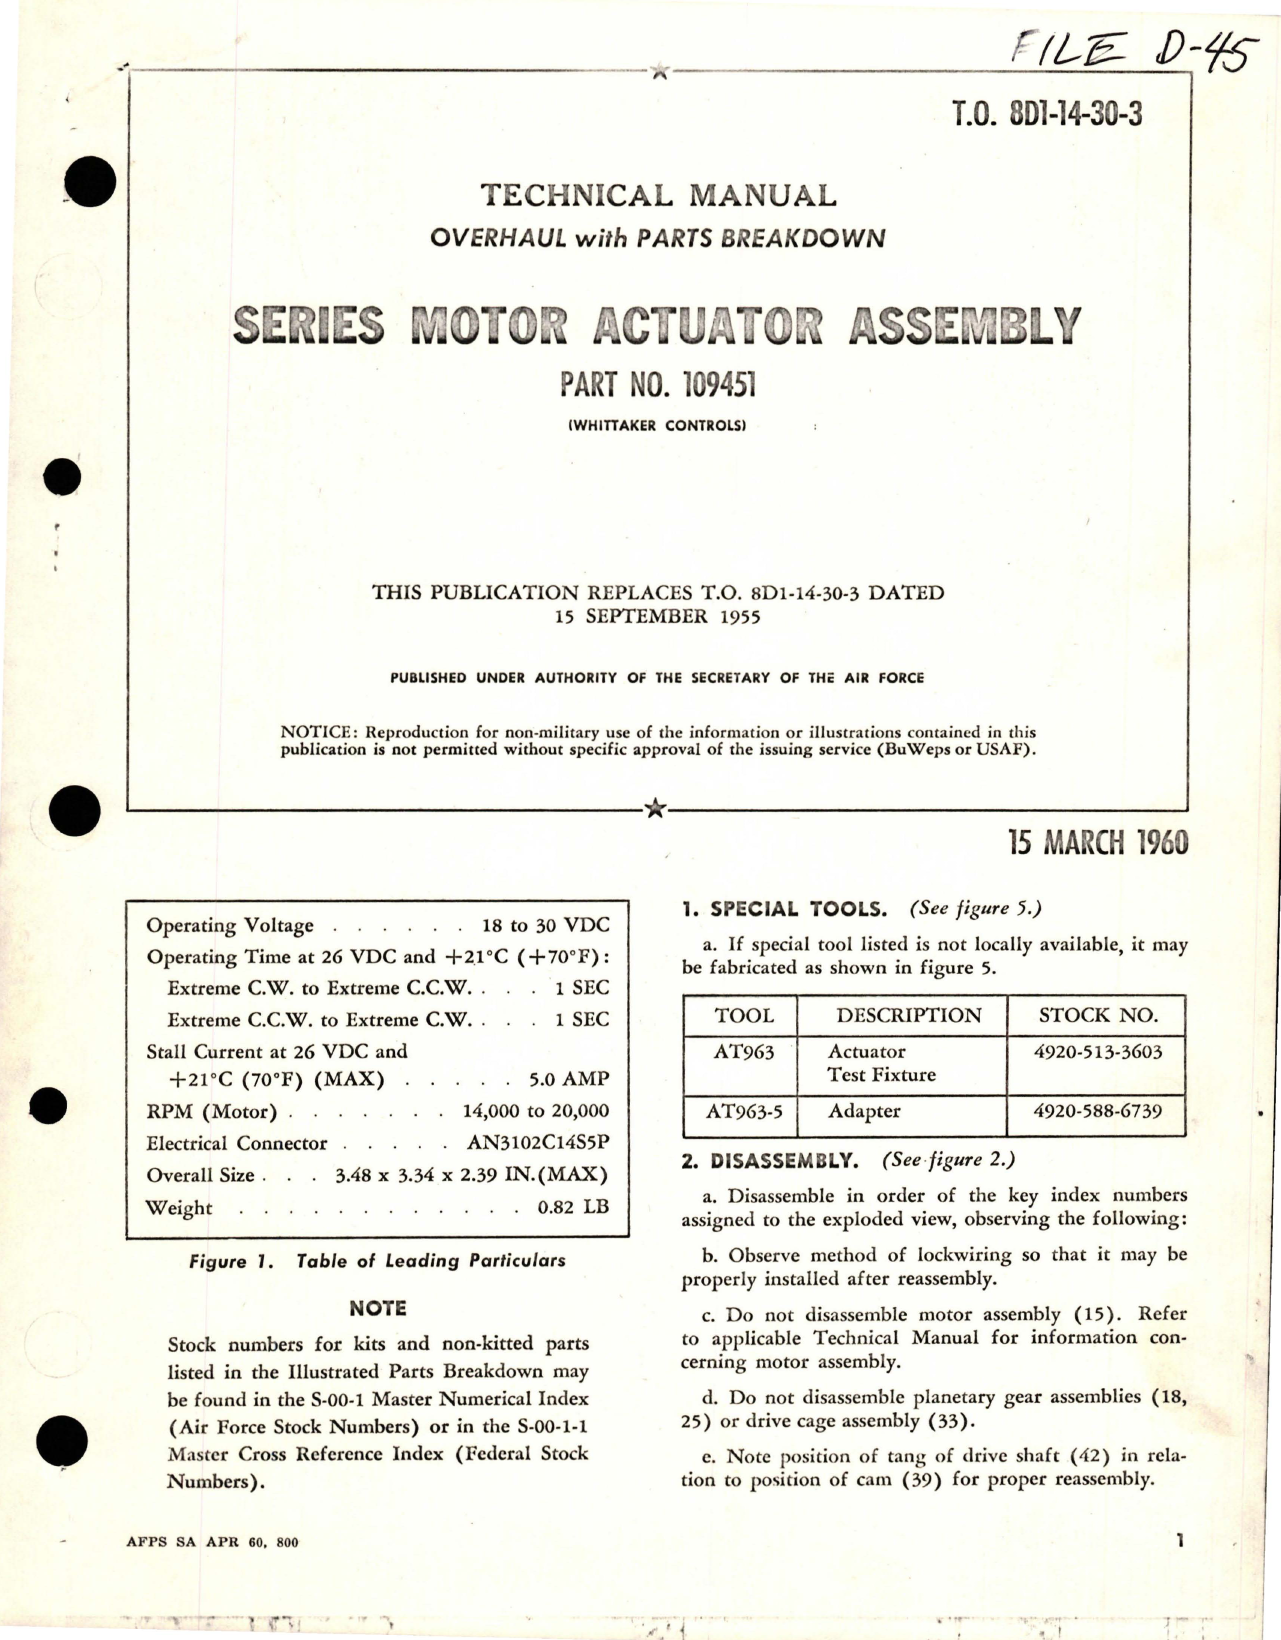 Sample page 1 from AirCorps Library document: Overhaul with Parts Breakdown for Series Motor Actuator Assembly - Part 109451